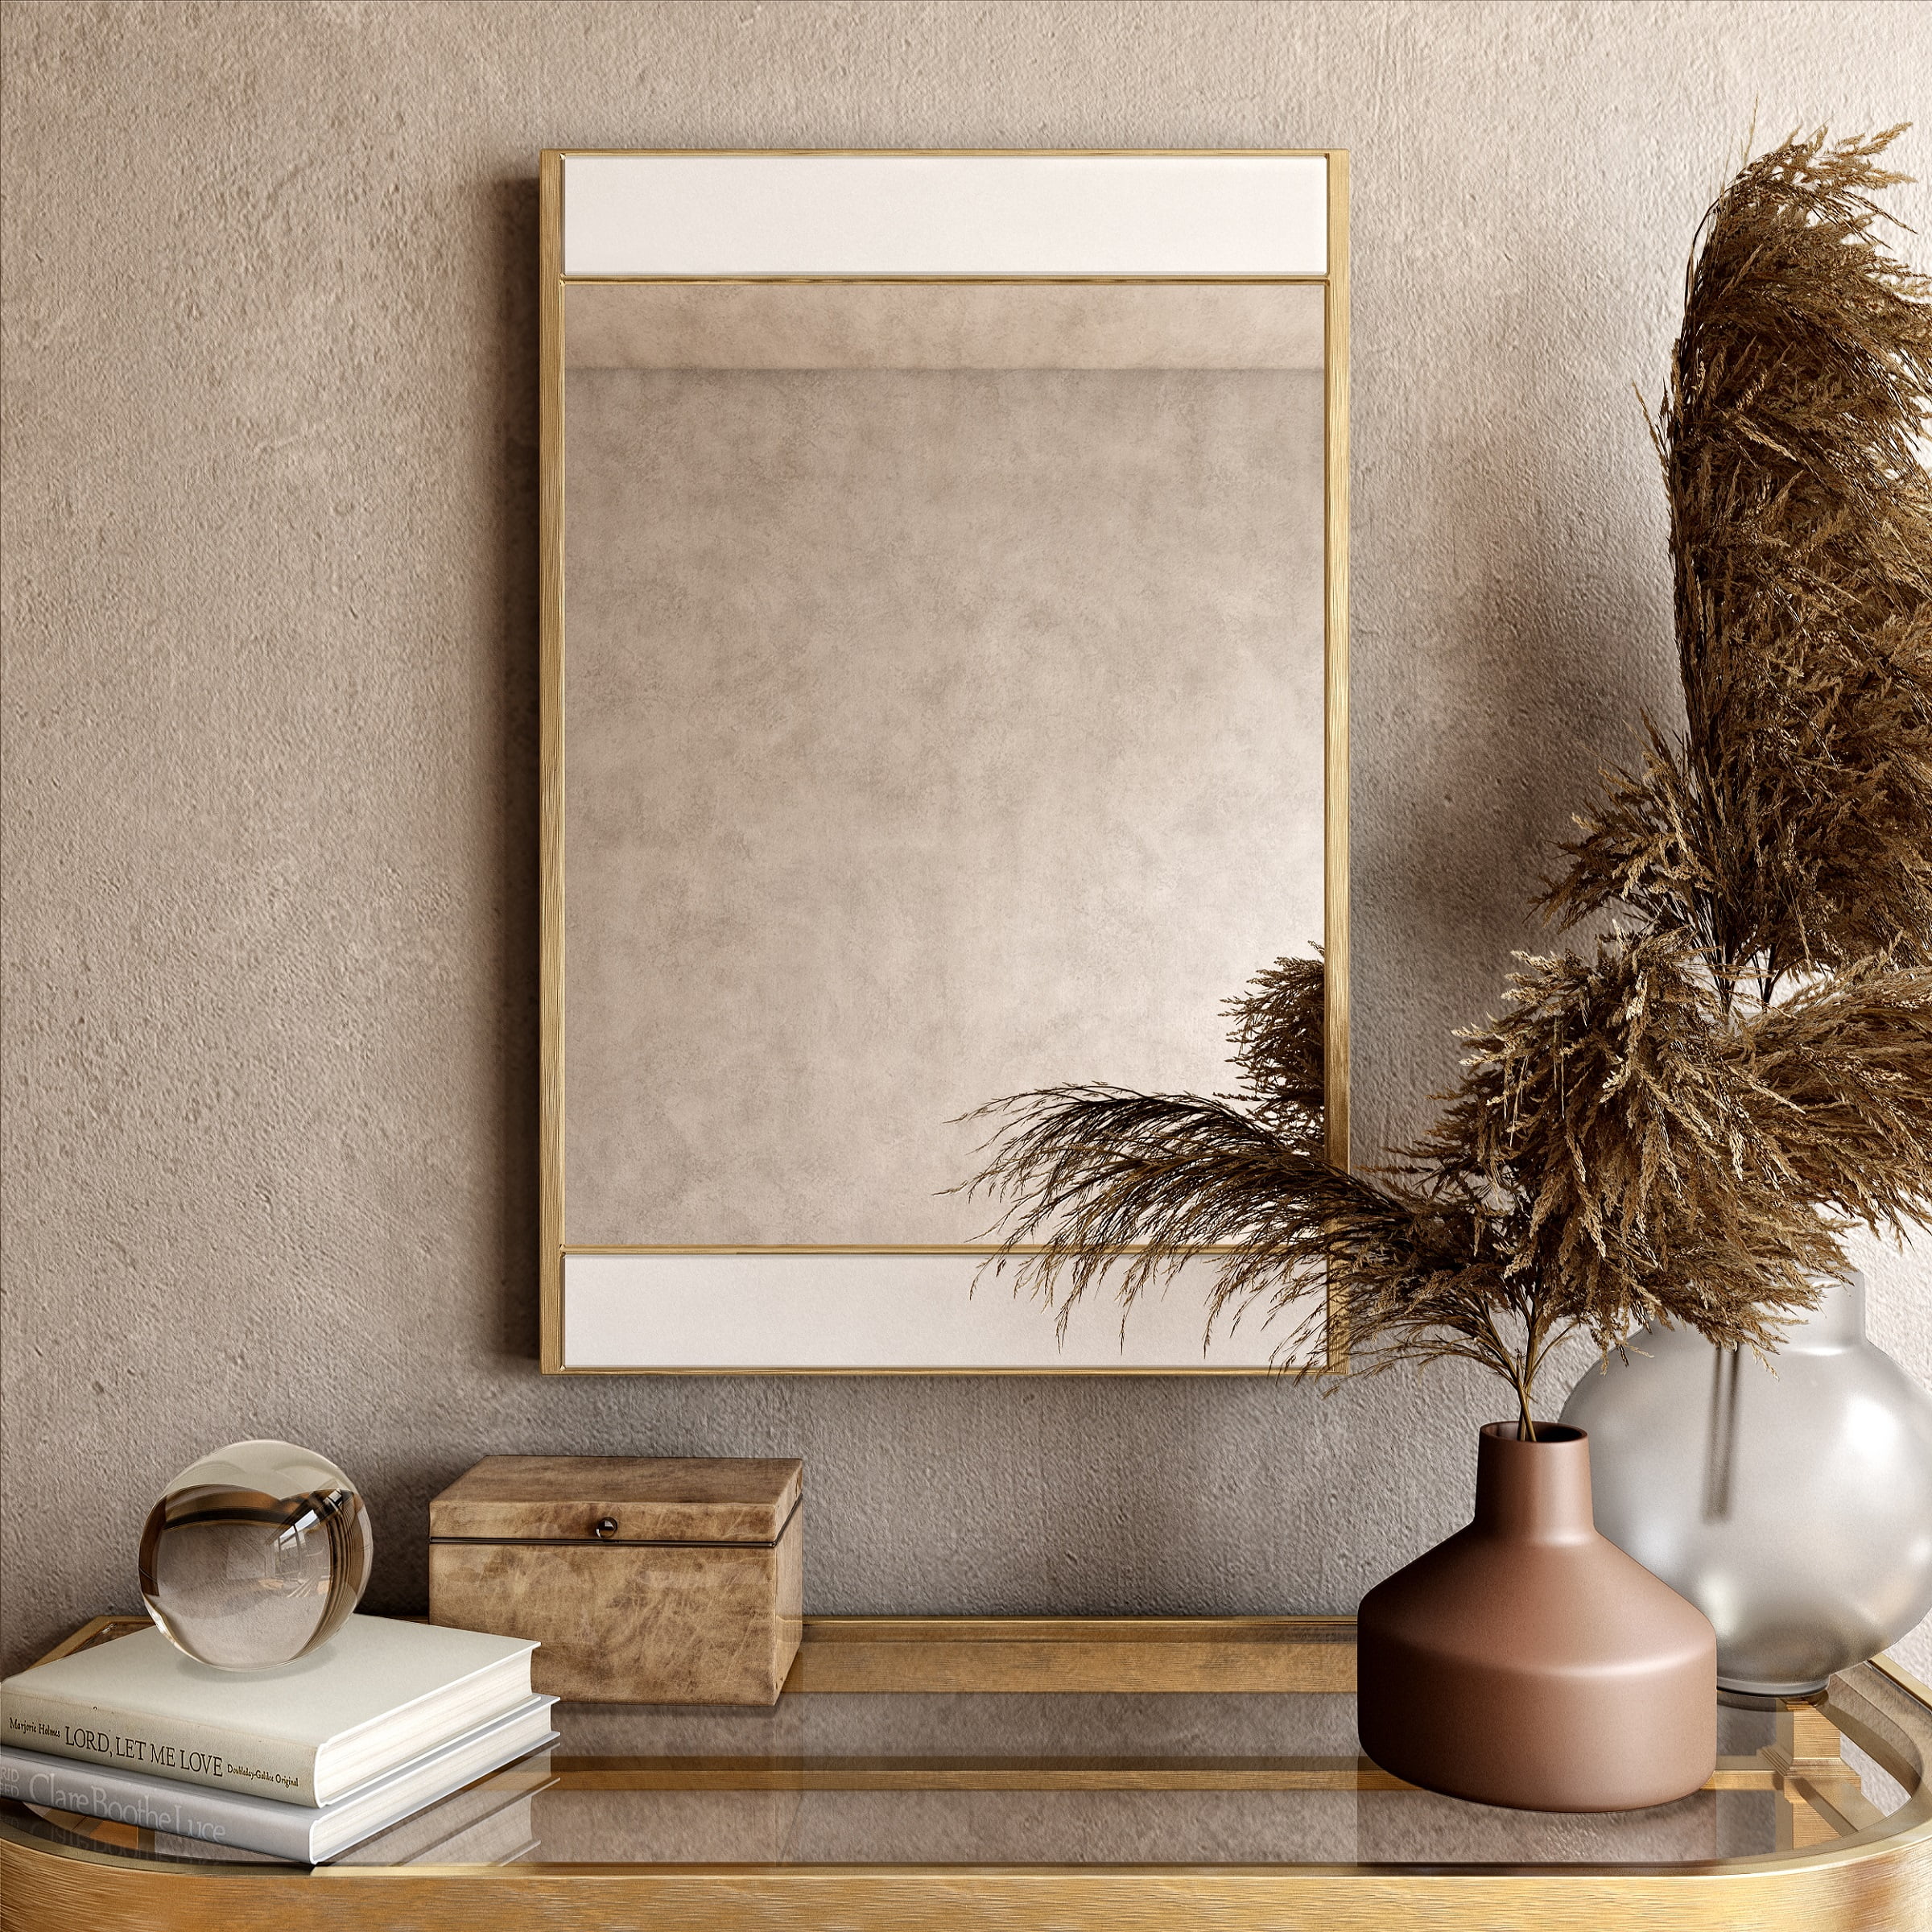 Picture of Aspire Home Accents 7678 Lina Modern Wall Mirror, Gold with Marble